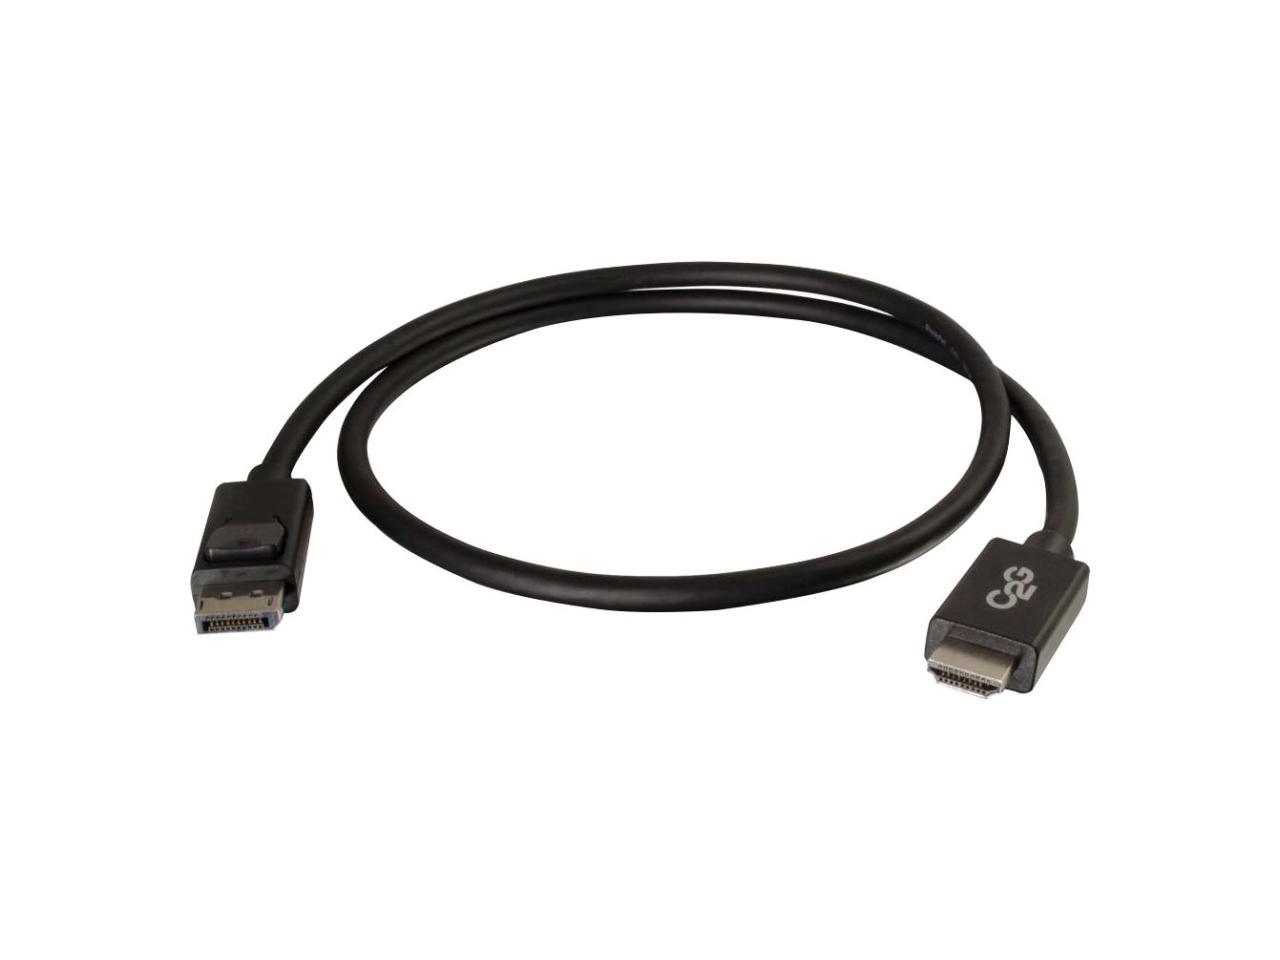 C2G 54326 DisplayPort to HDMI Adapter Cable M/M, TAA Compliant, Black (6 Feet, 1.82 Meters)